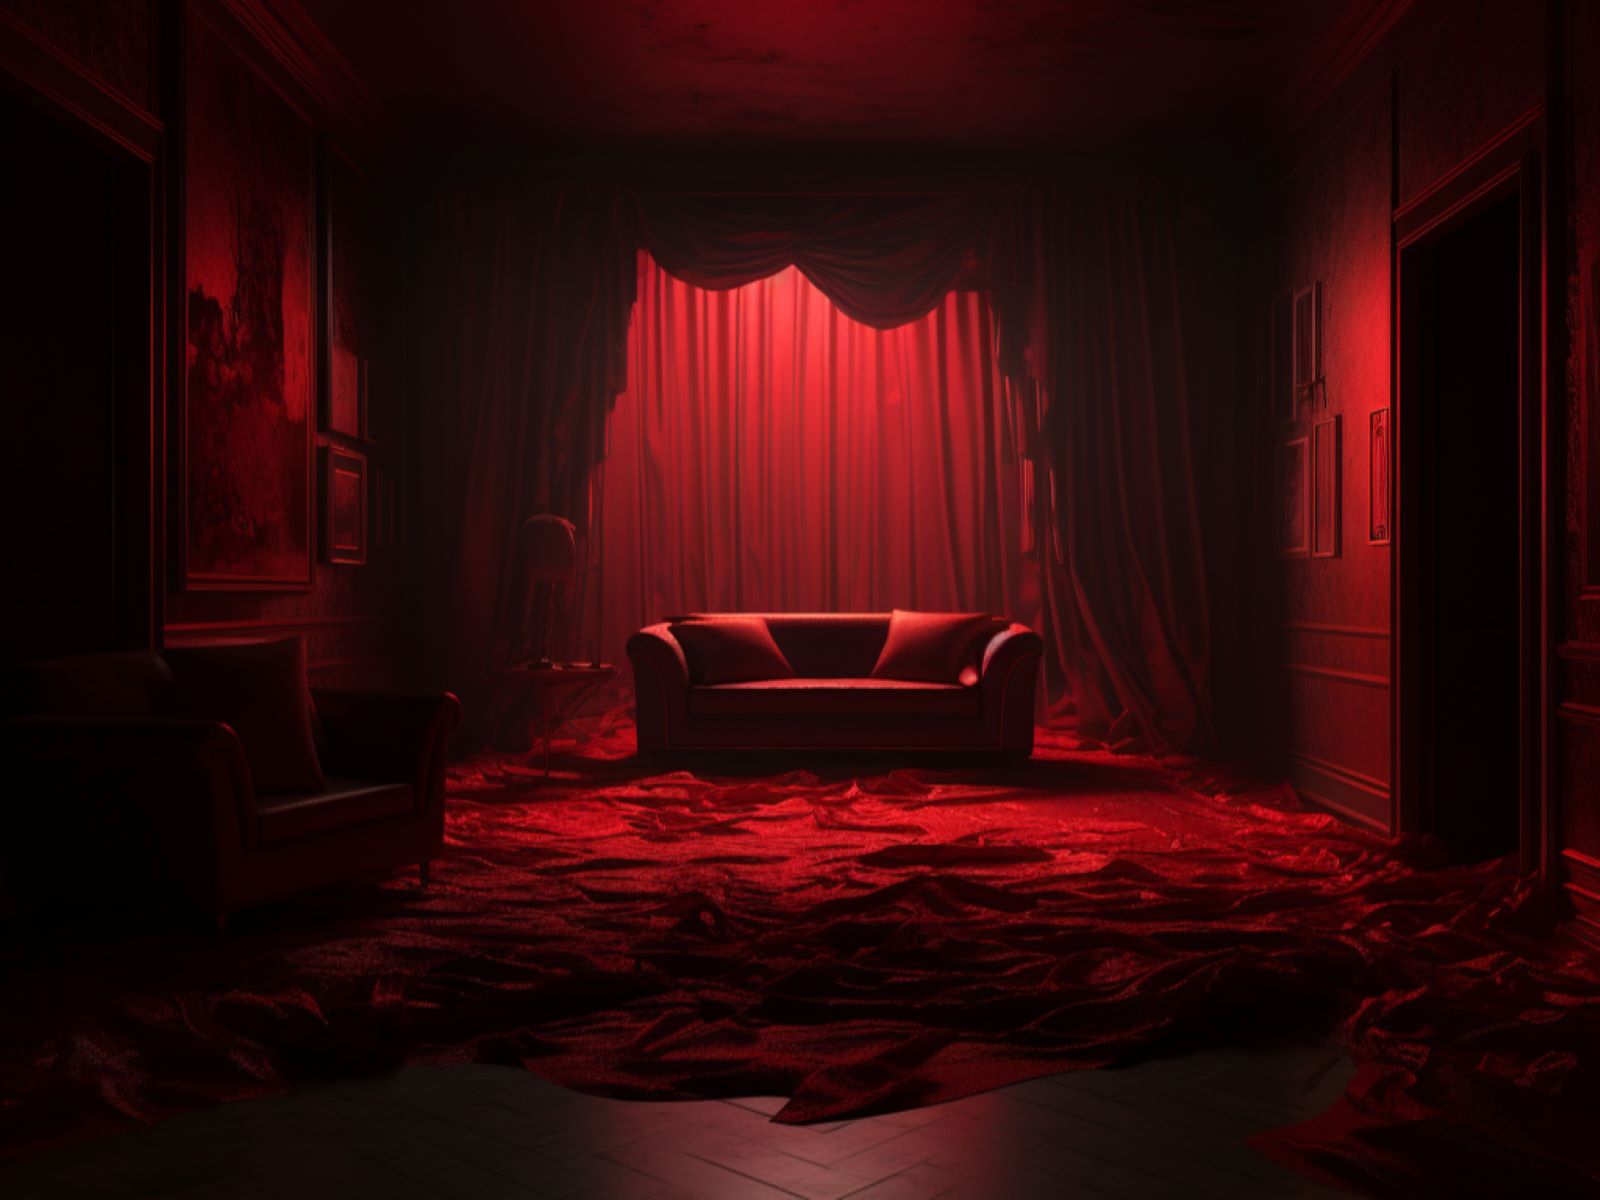 The Shocking Truth About Deep Web 'Red Rooms' - Why Can't Anyone Prove Their Existence?